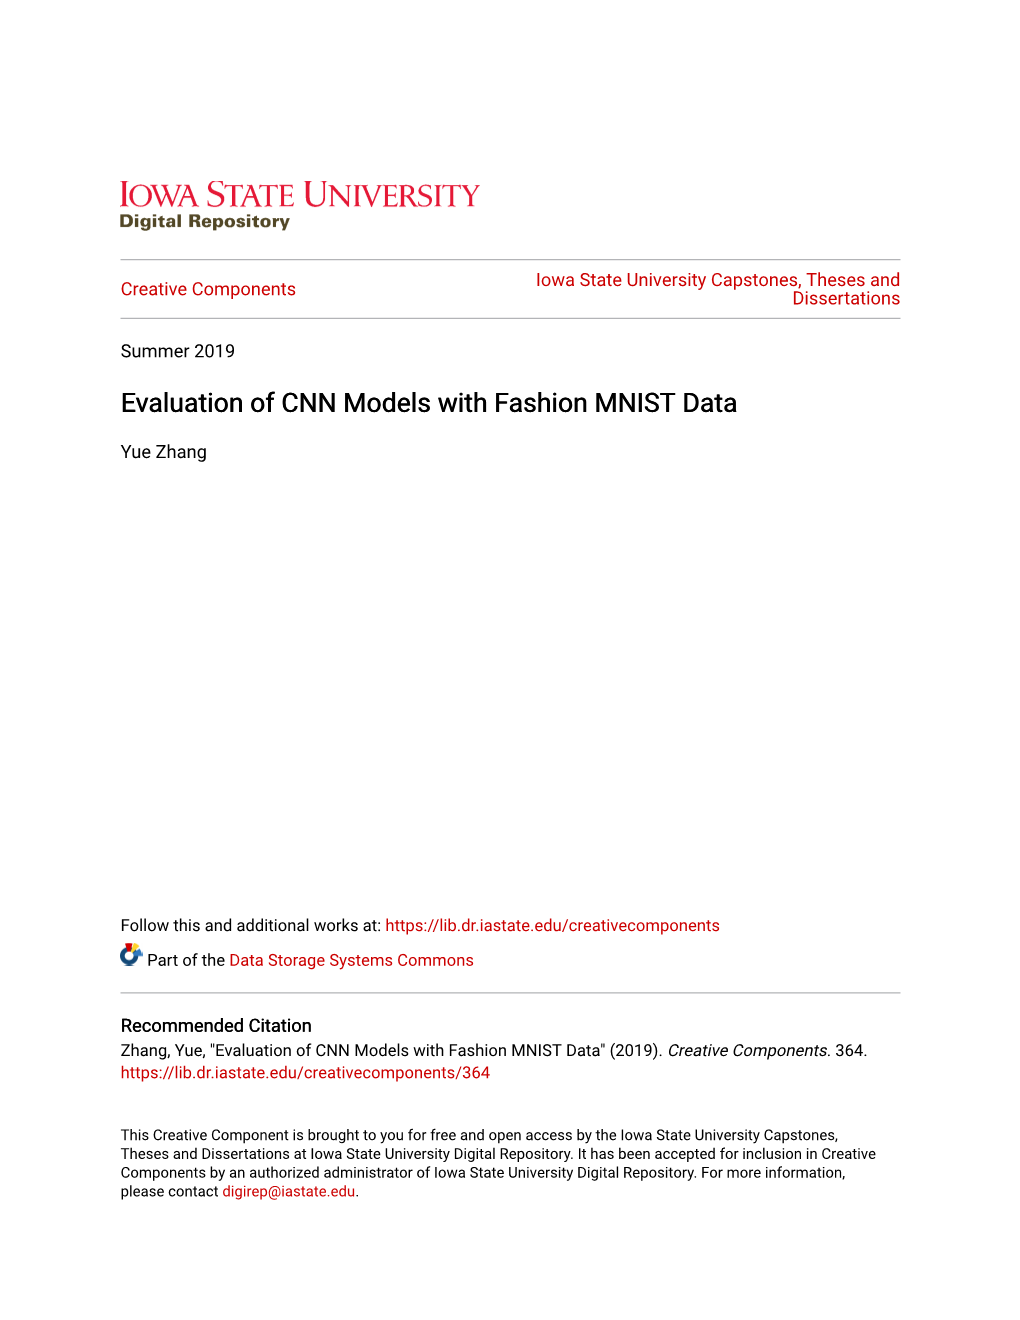 Evaluation of CNN Models with Fashion MNIST Data